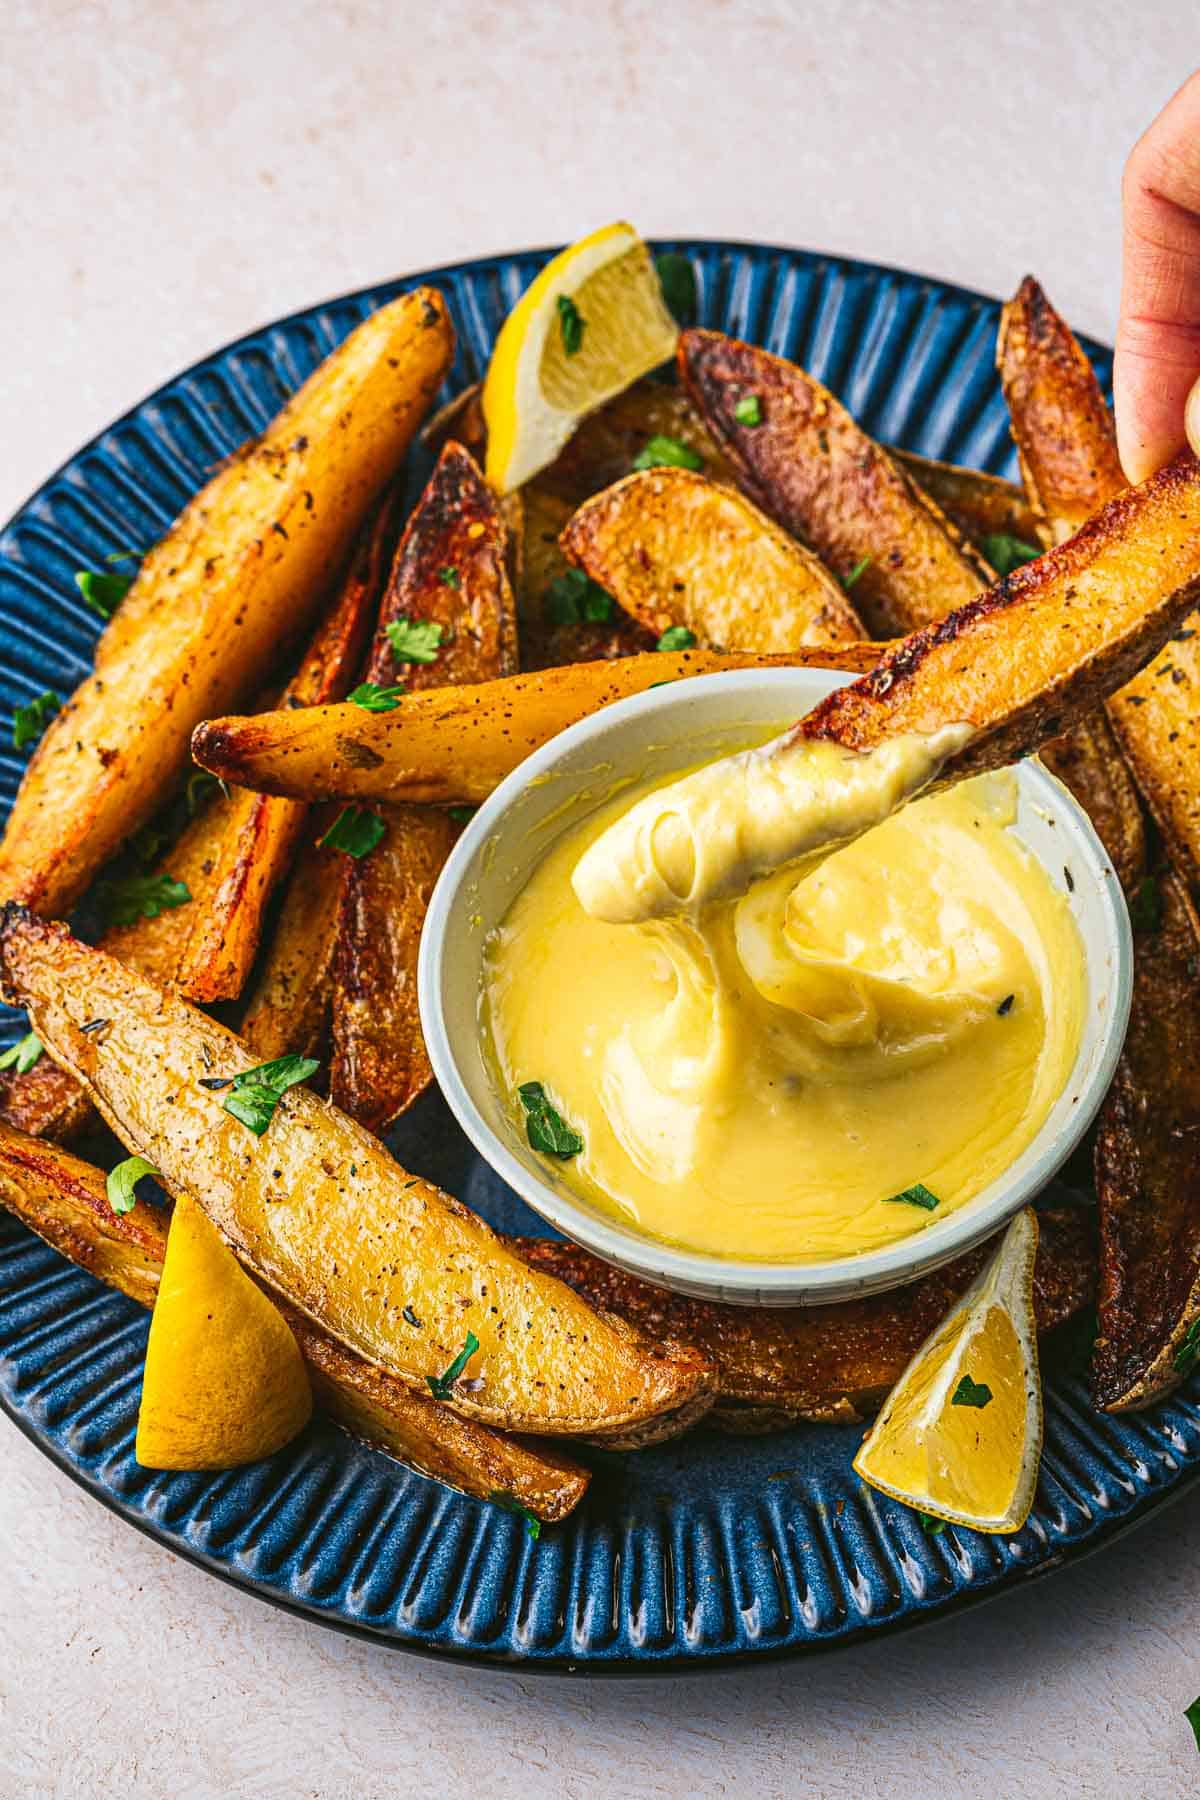 a potato wedge being dipped into a bowl of garlic aioli that's on a plate with more potato wedges and lemons.